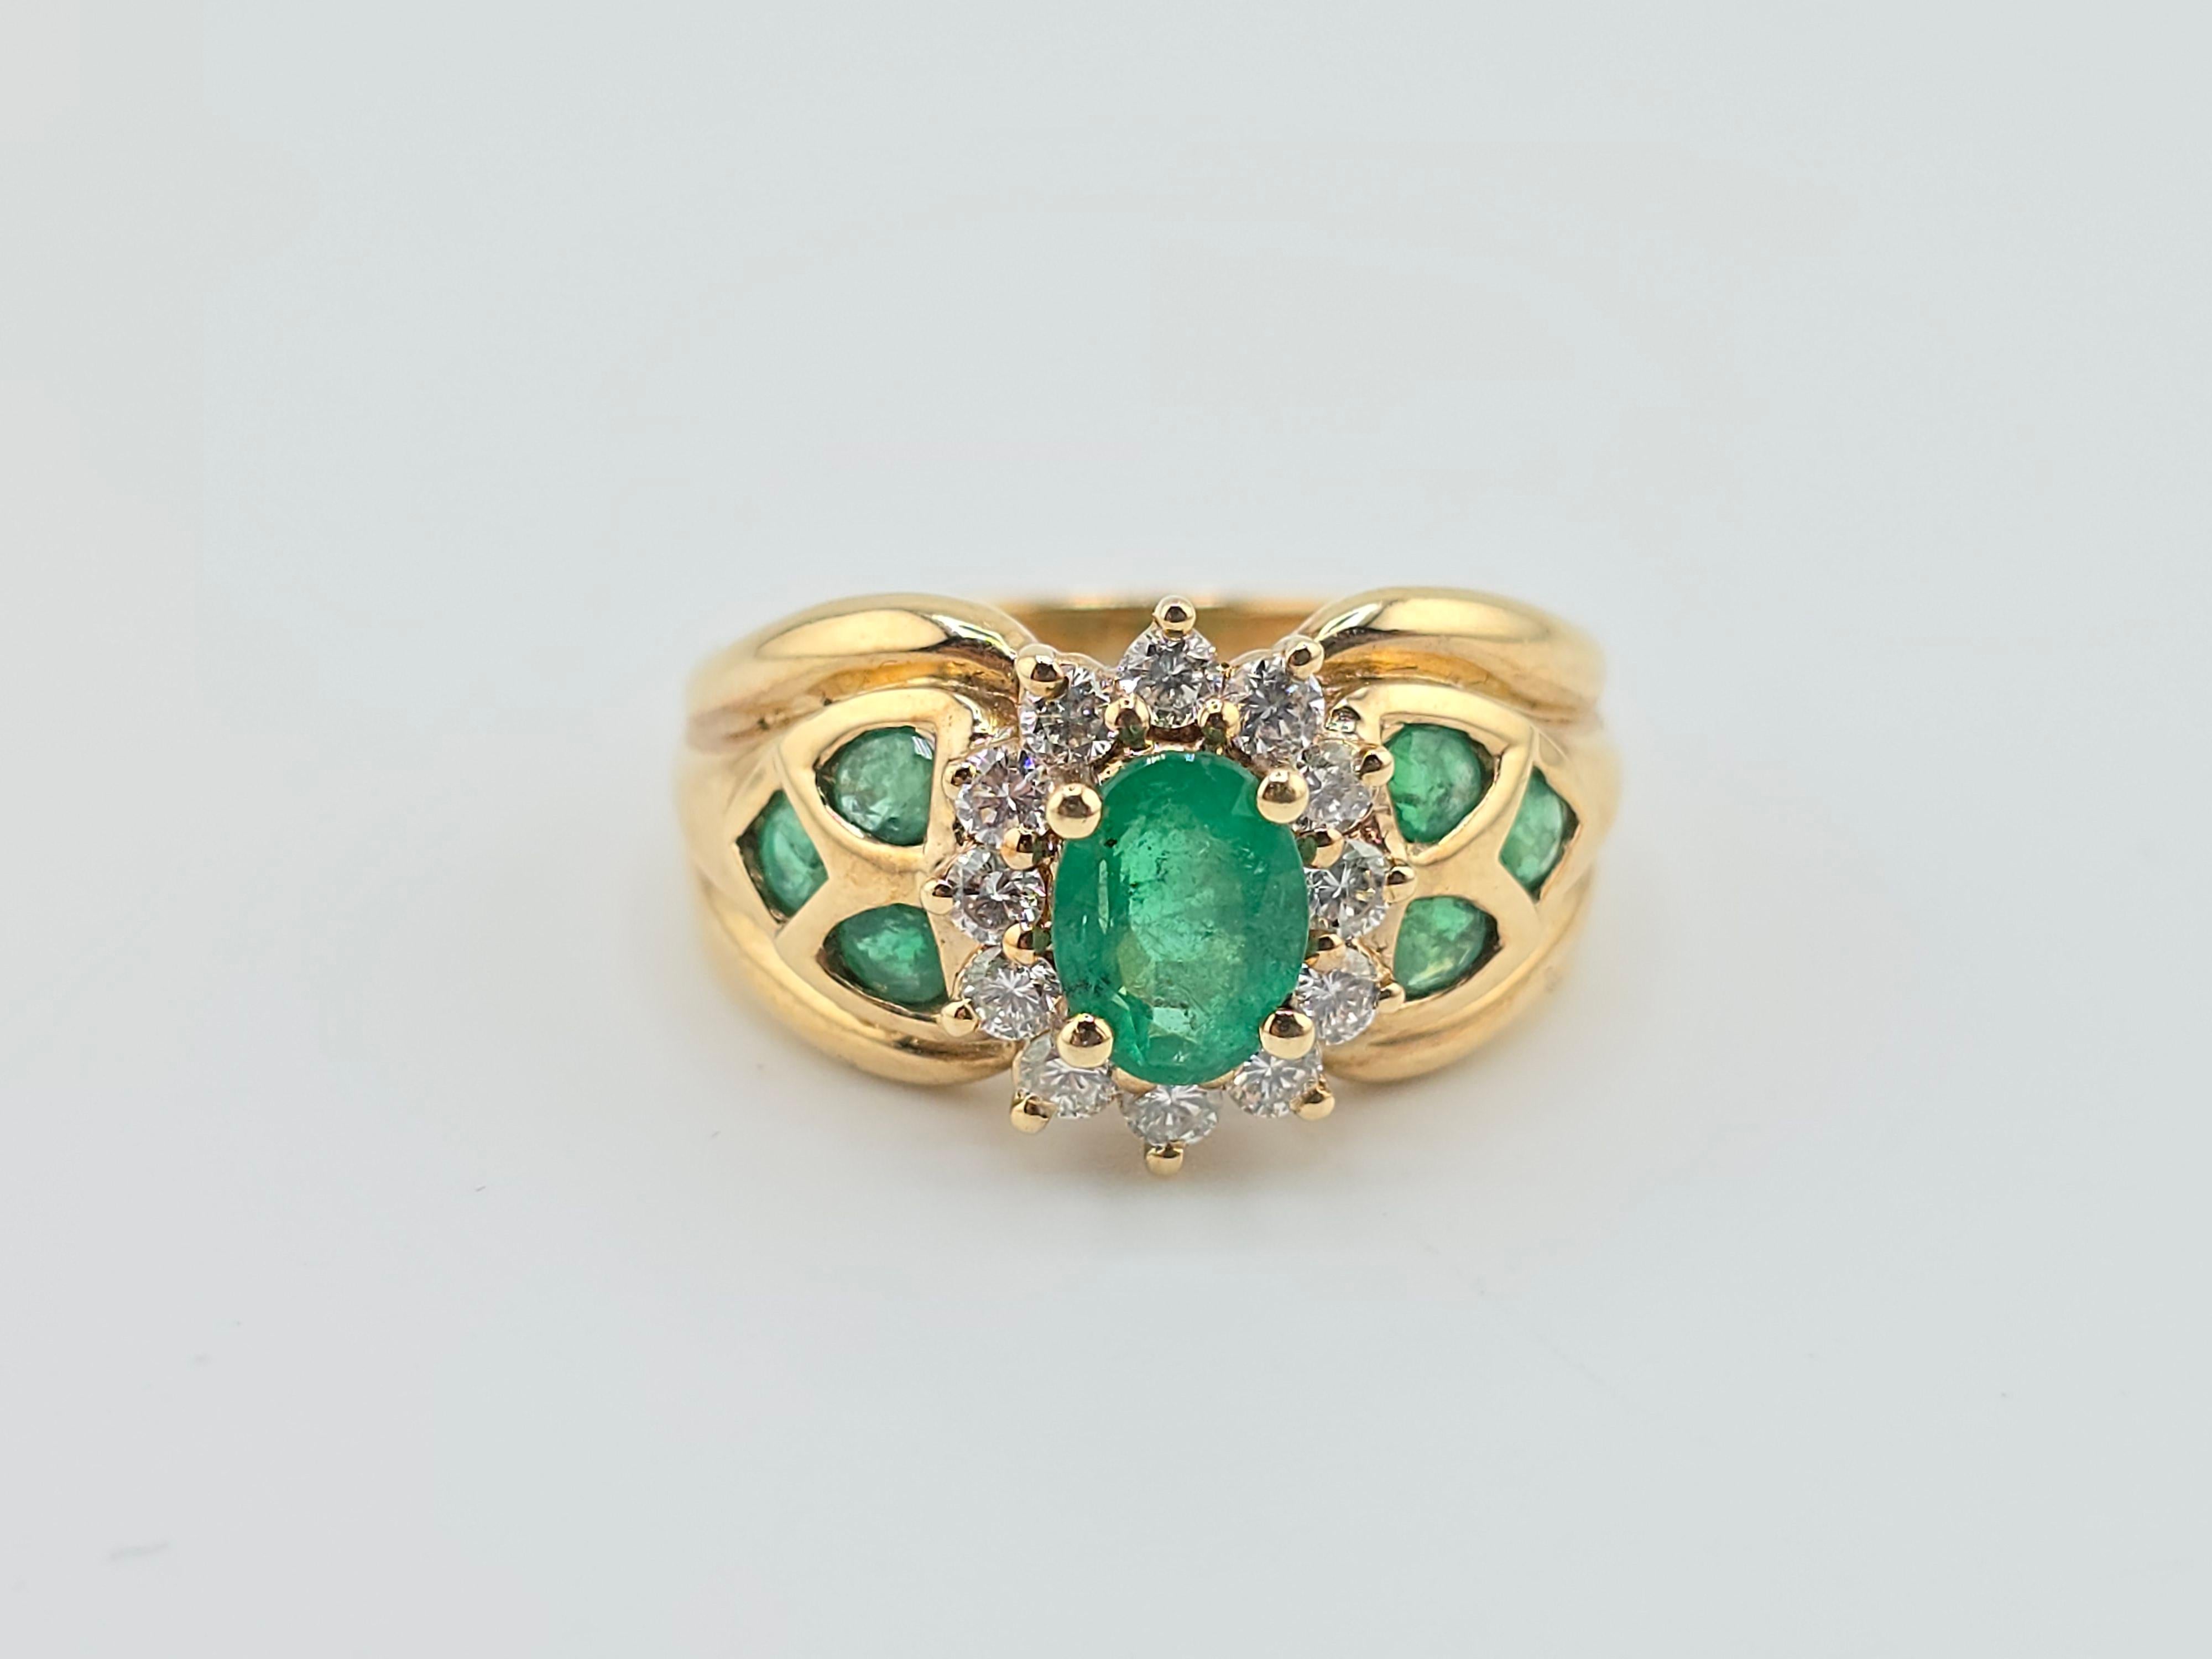 This is a fantastic 14 karat yellow gold ring with fabulous emeralds and diamonds. The emerald has a nice rich, vibrant green color, and the diamonds are all very clean and good color VS to SI quality. The weight of the ring is 6.01 grams and the